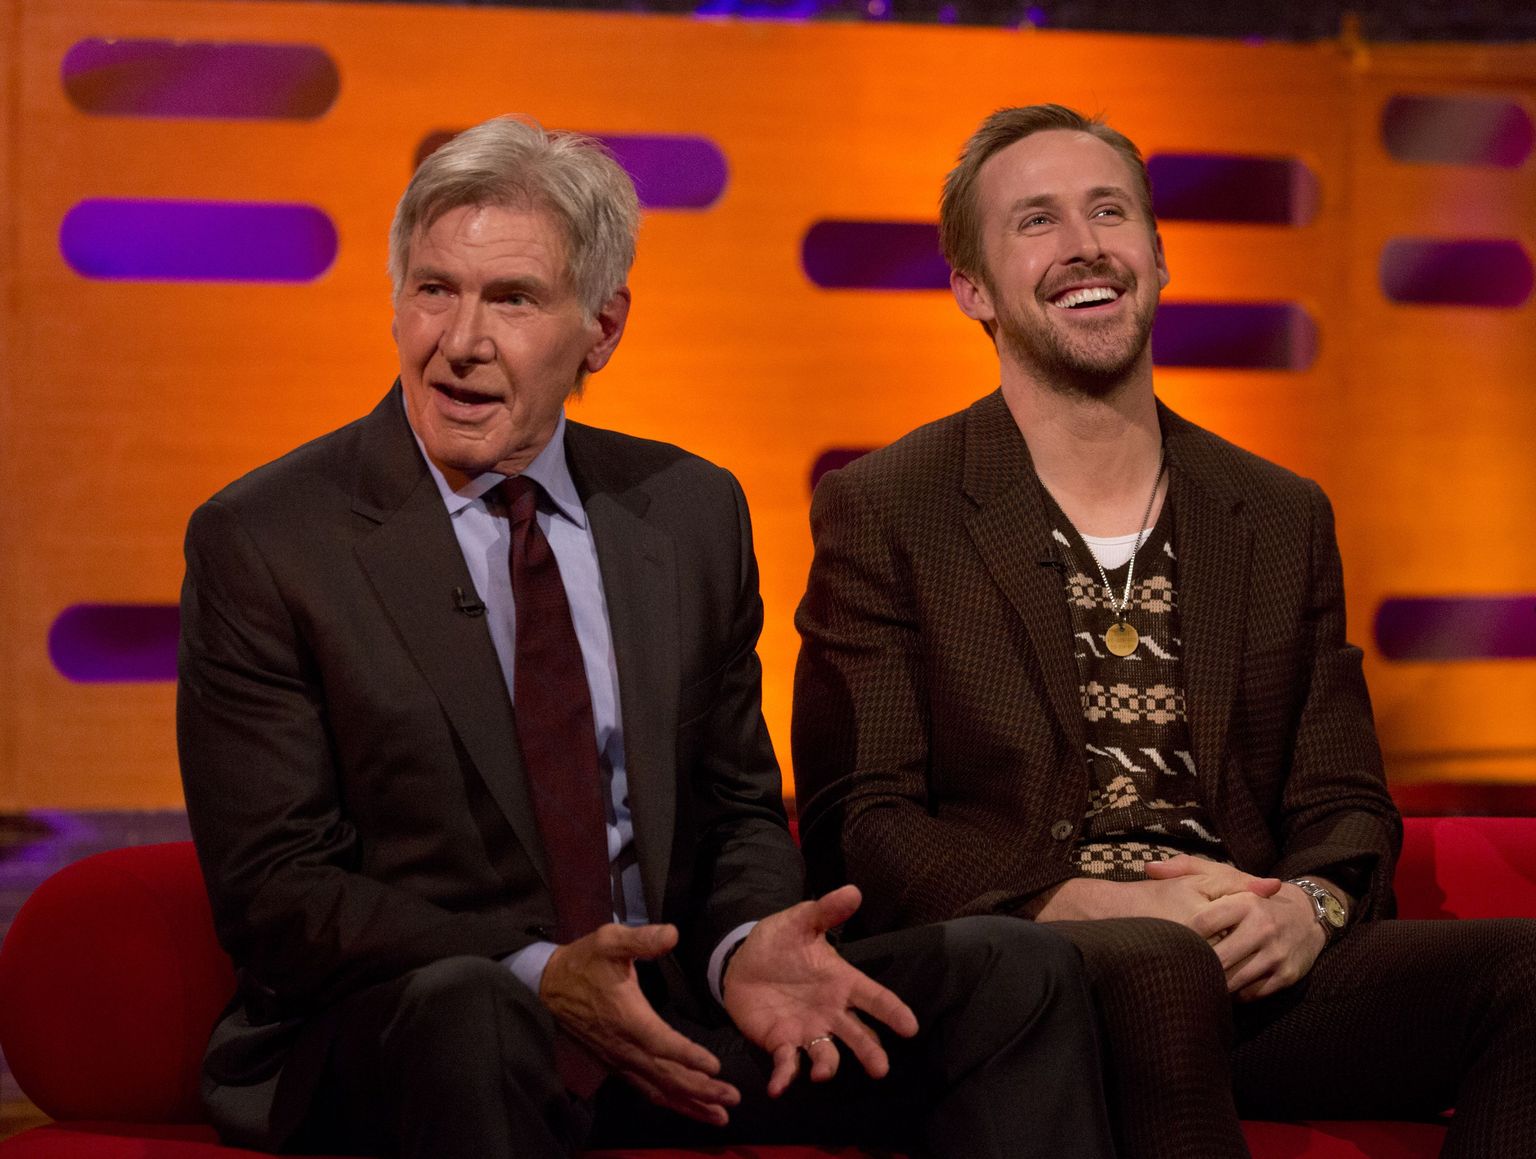 Harrison Ford and Ryan Gosling during filming of the Graham Norton Show at the London Studios, to be aired on BBC One on Friday evening.